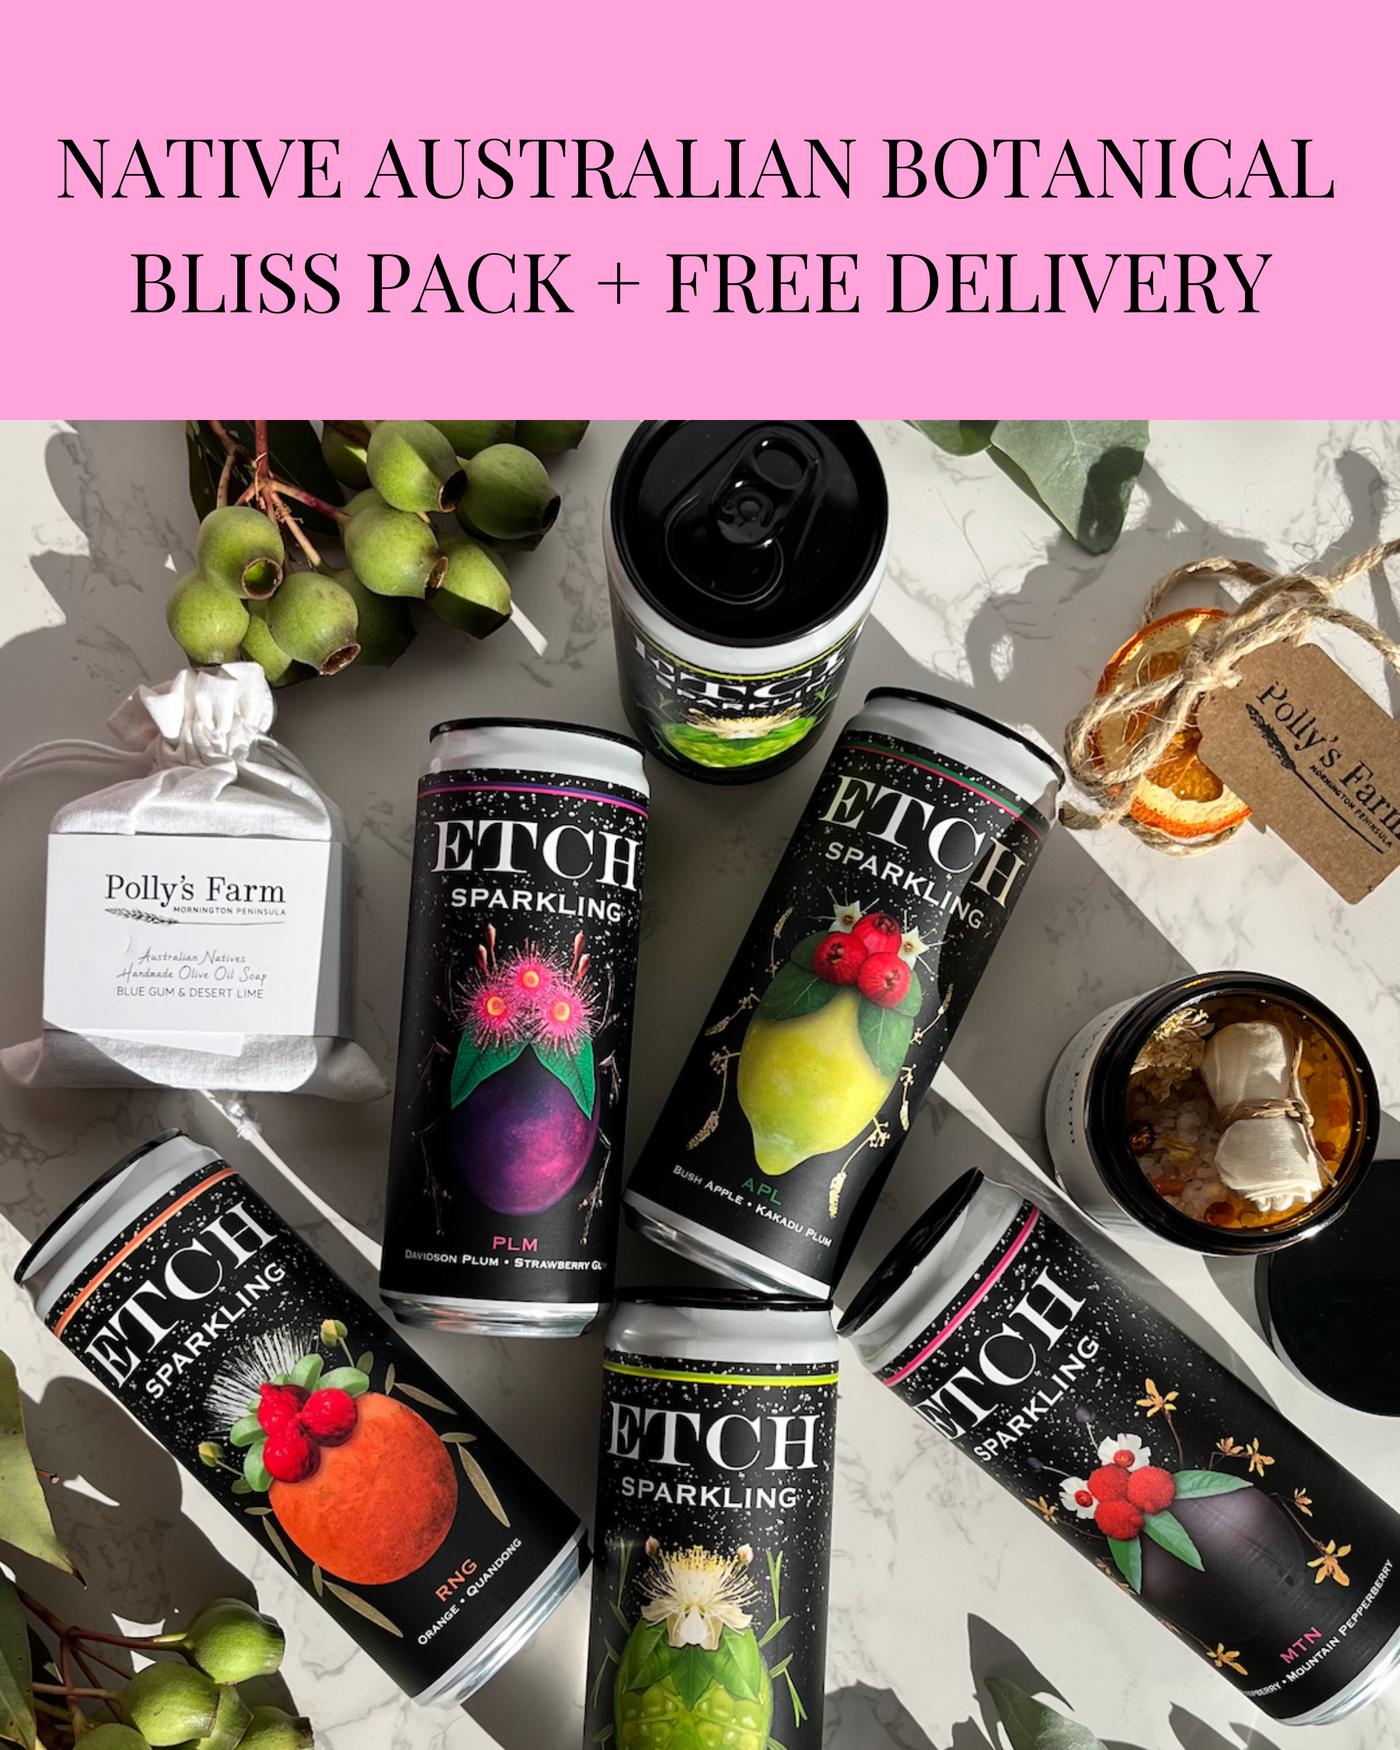 Native Australian Botanical Bliss Pack inc. FREE DELIVERY